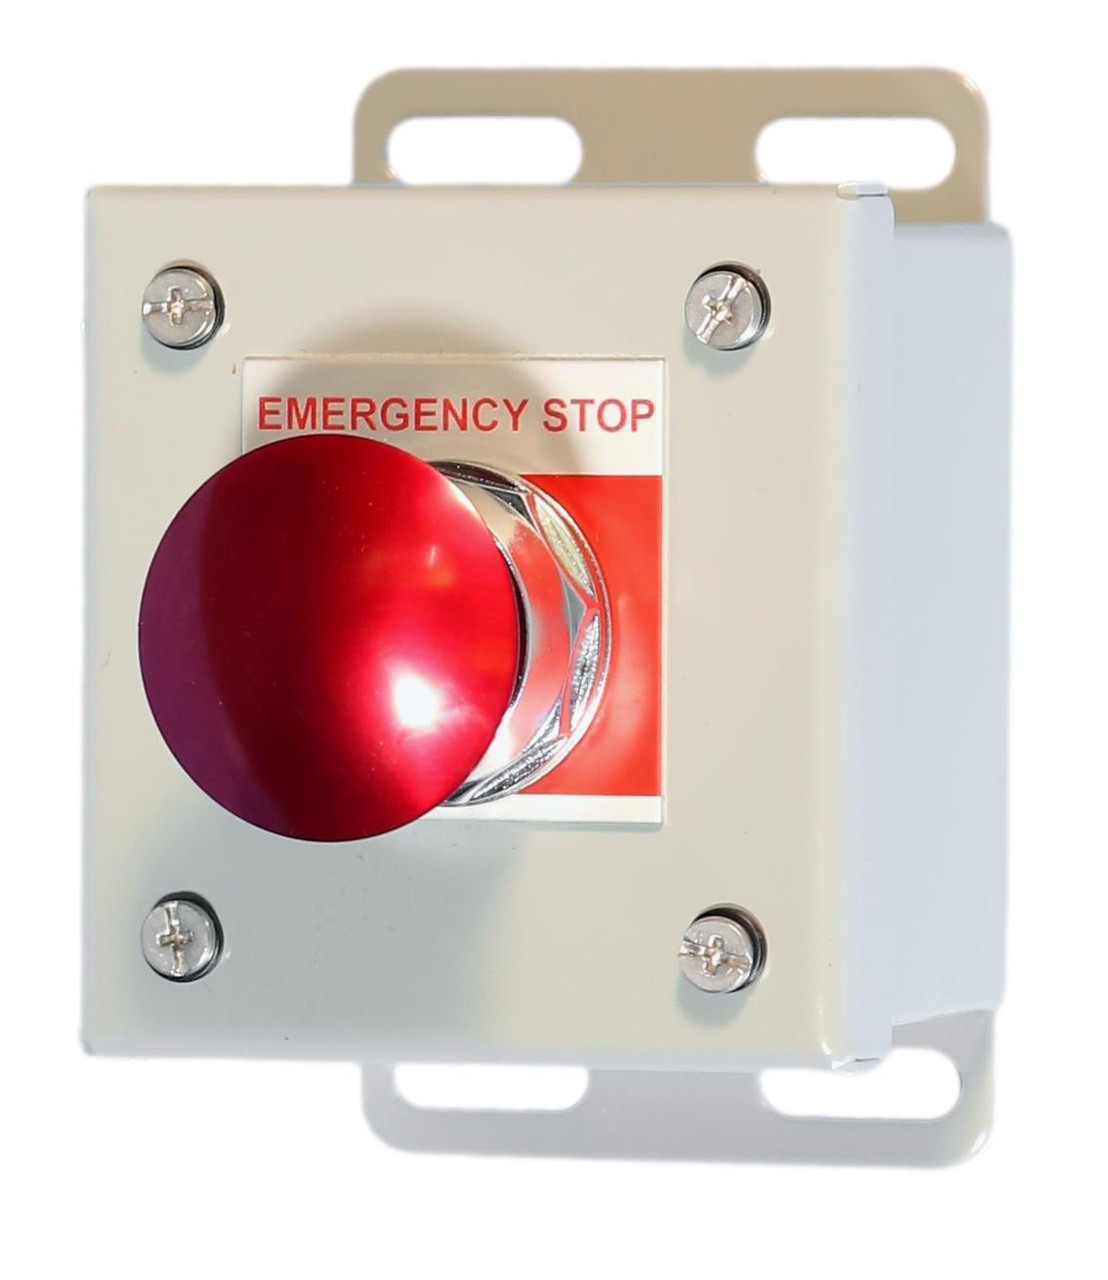 Siemens Emergency Stop Button Enclosed
SCE-1PM